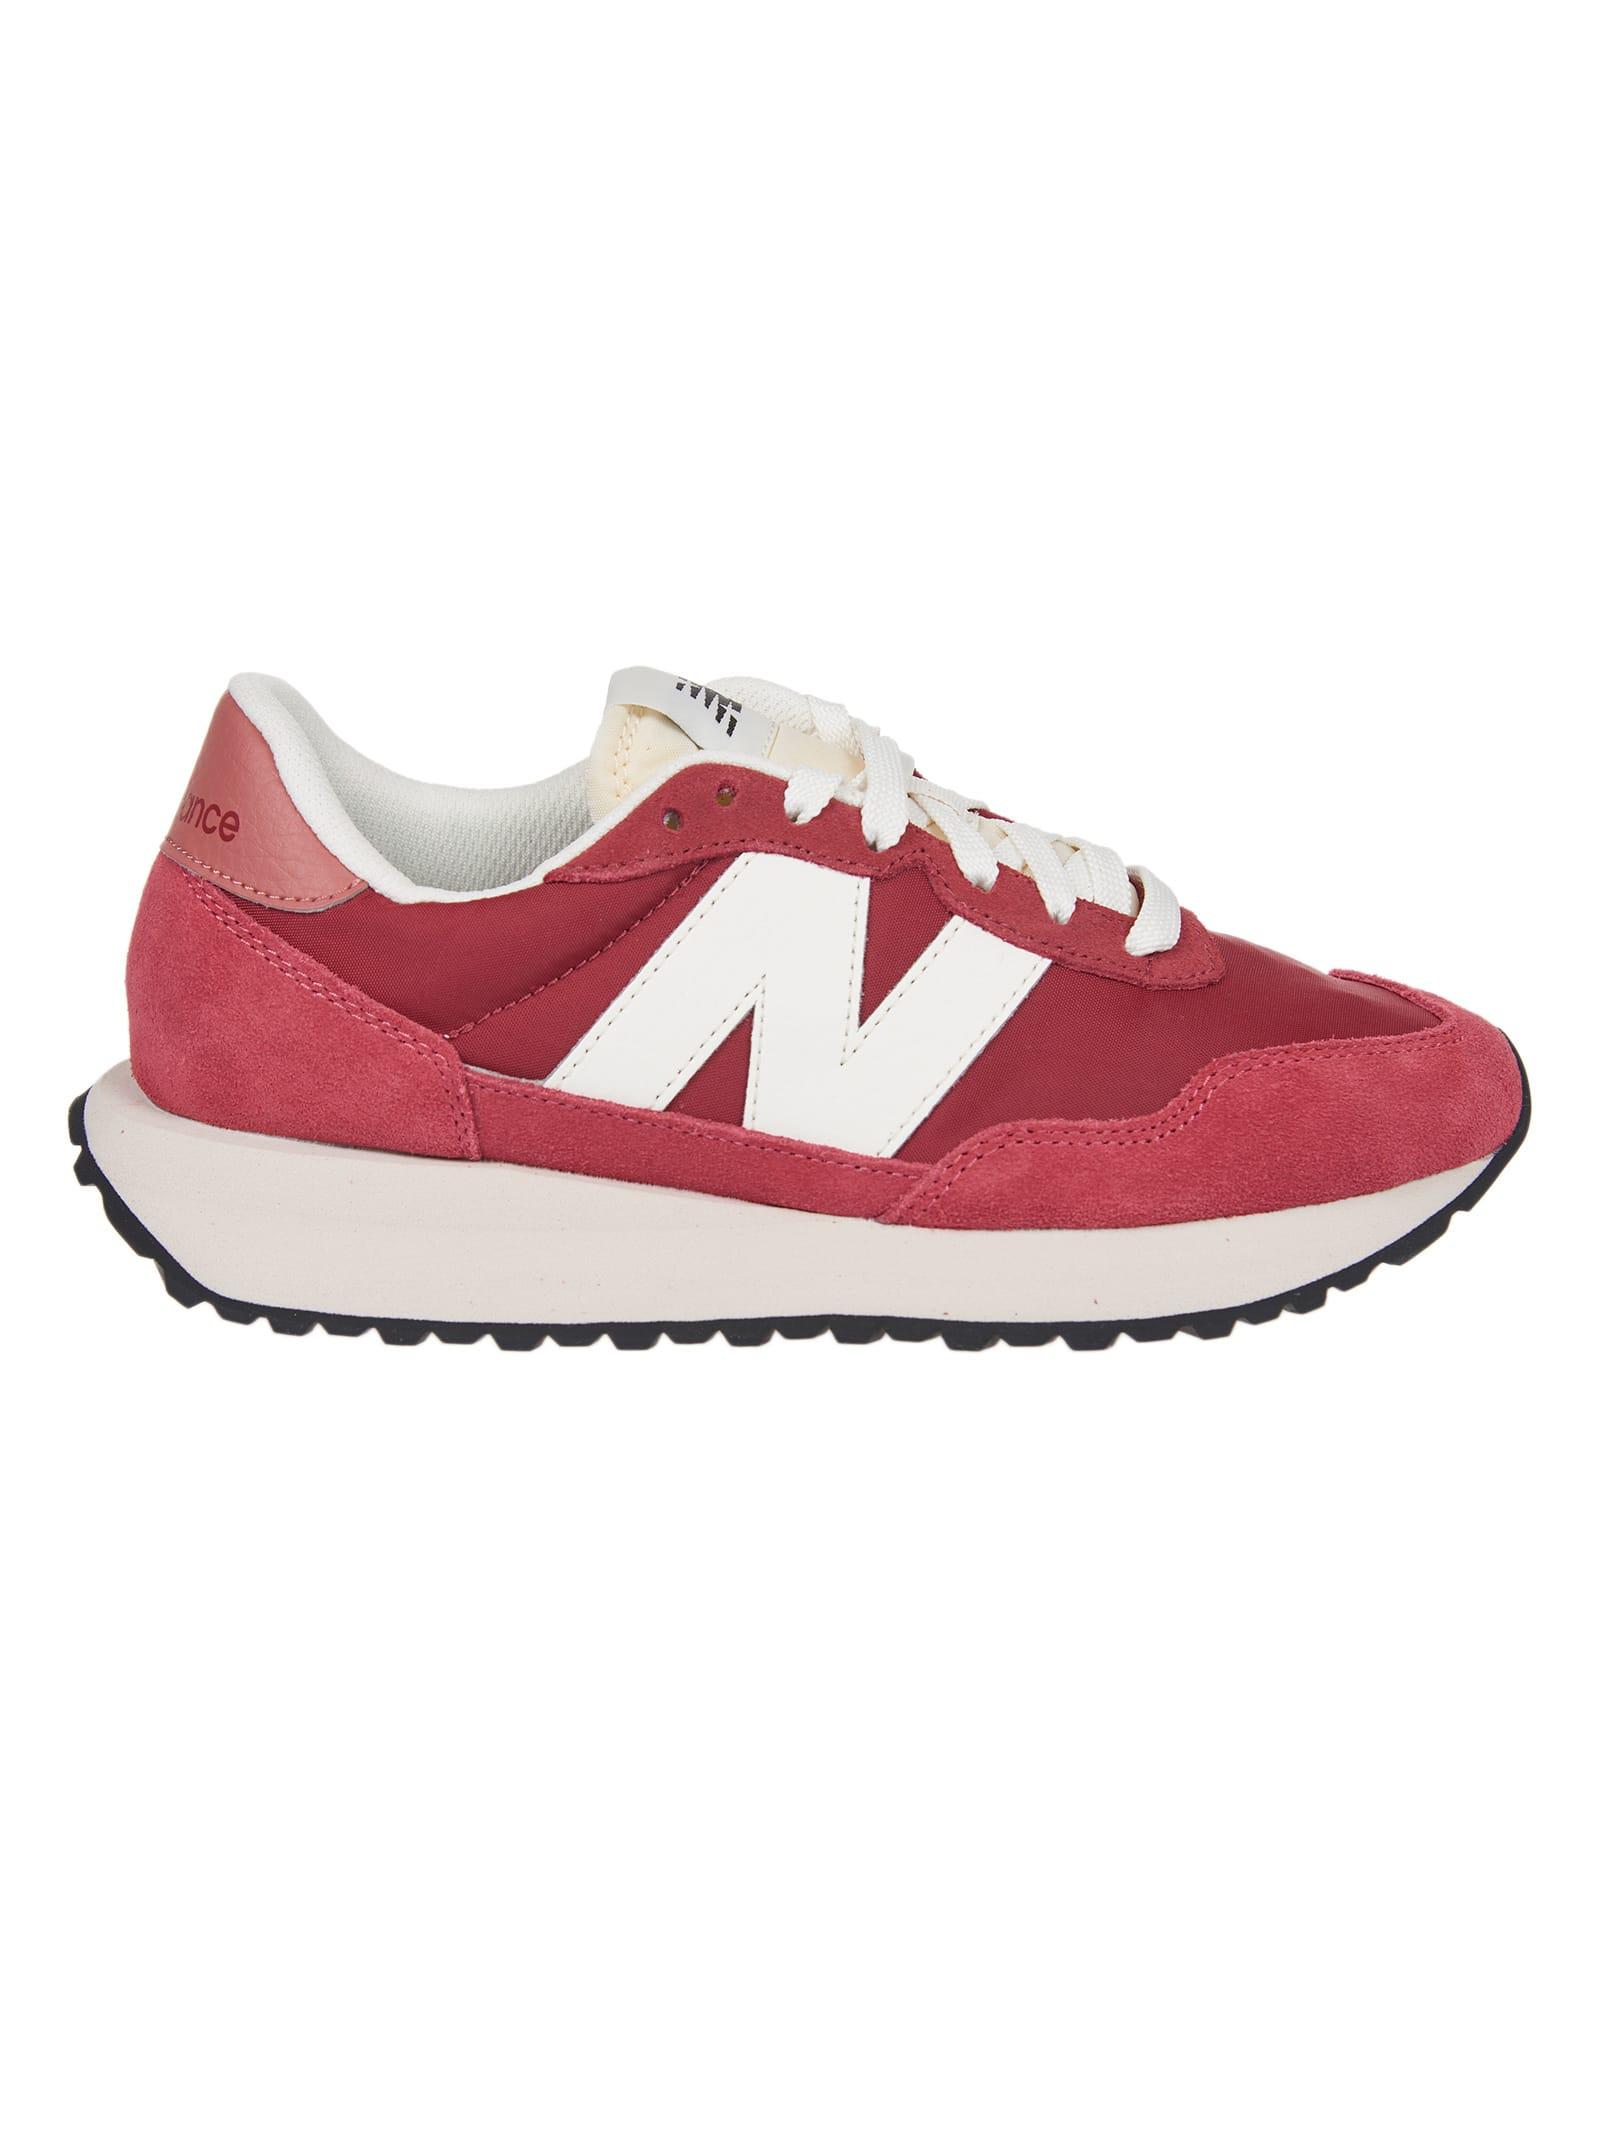 New Balance 237 Sneakers - Women in Red | Lyst